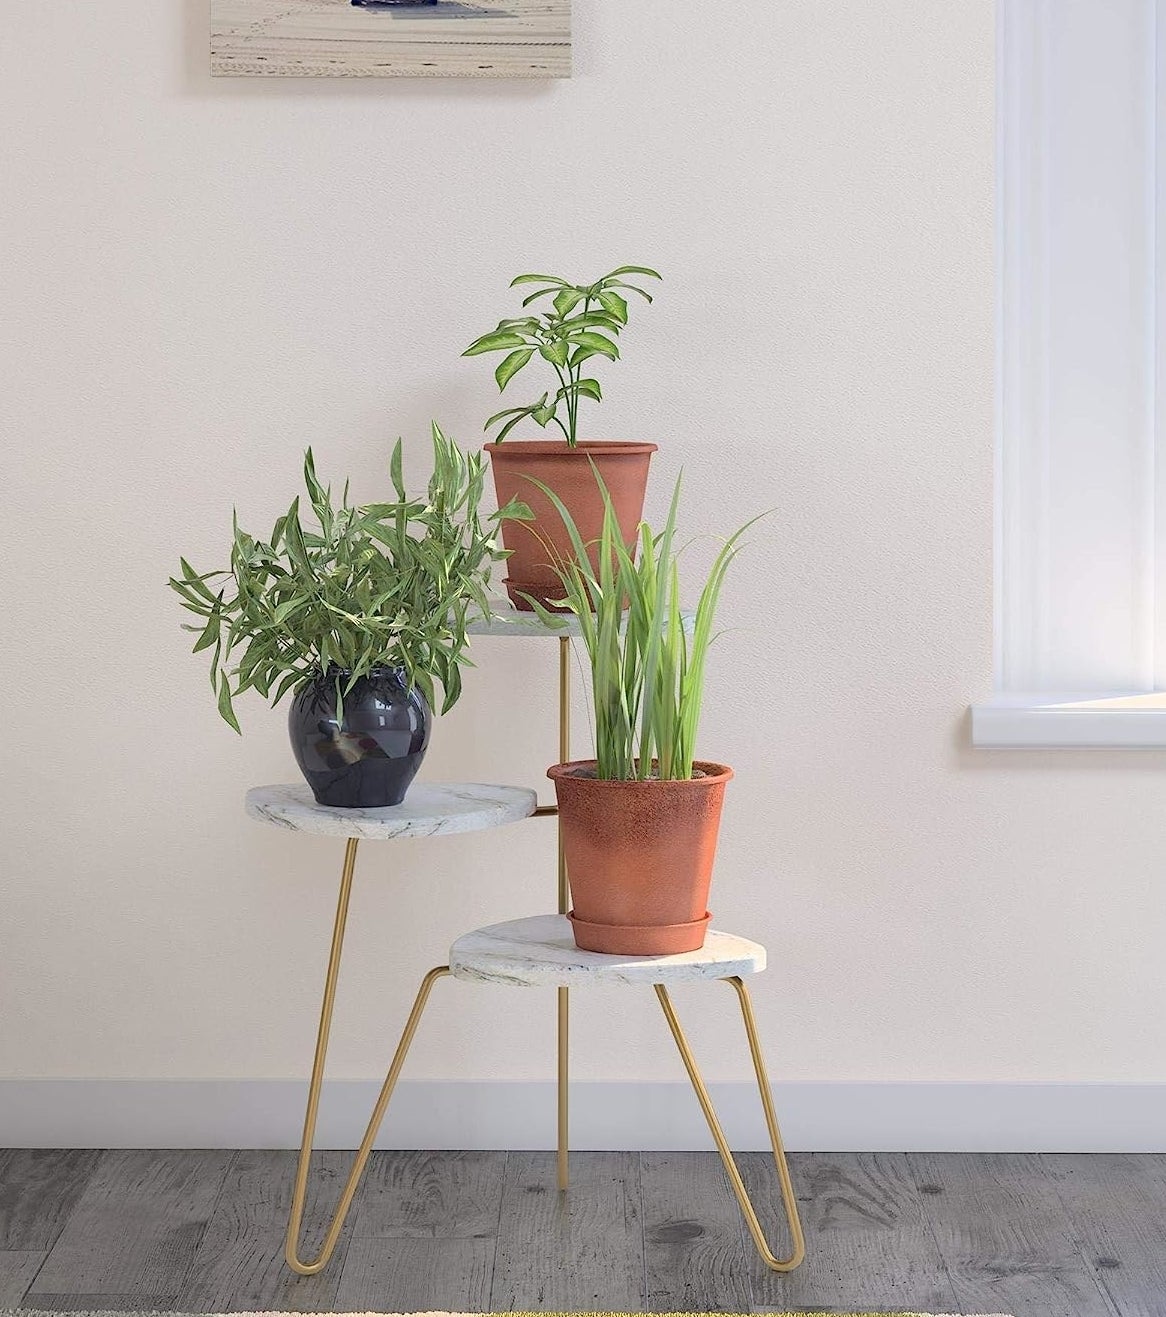 The white marble and gold metal plant stand displays three plants